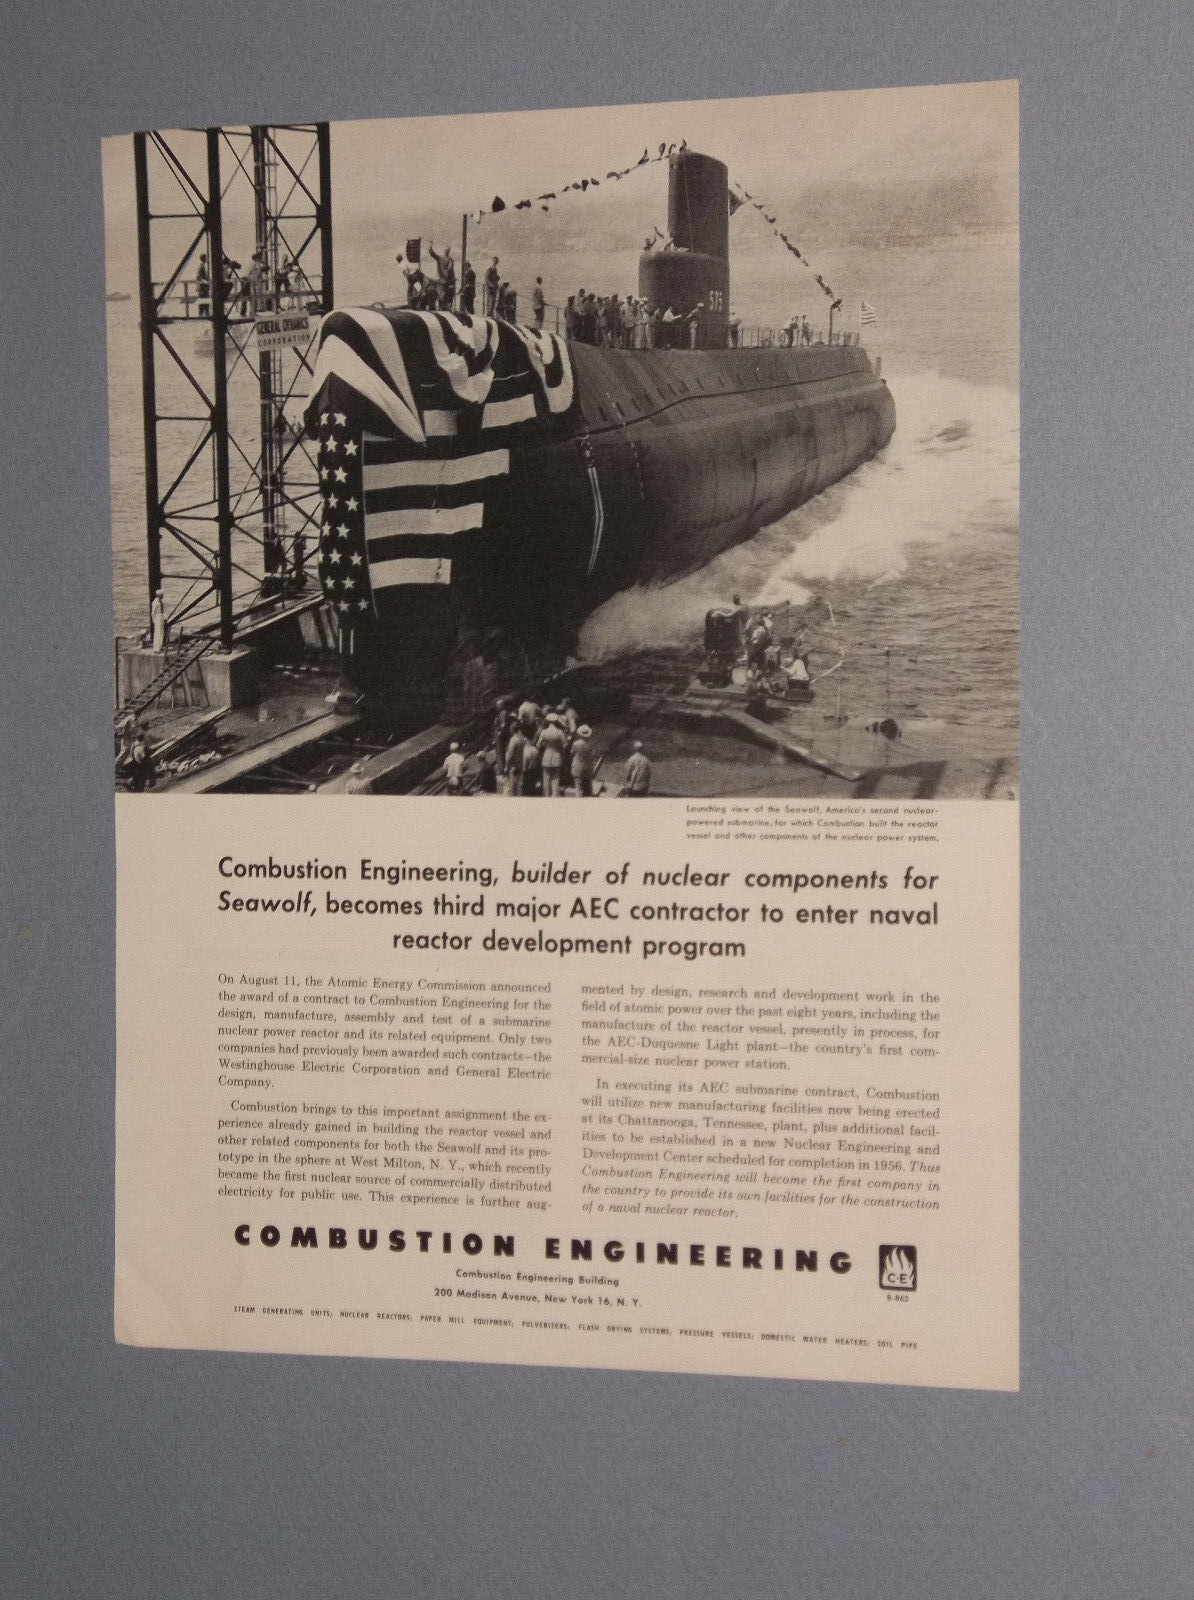 1955 COMBUSTION ENGINEERING AD W/ THE USS SEAWOLF THE SECOND NUCLEAR SUBMARINE